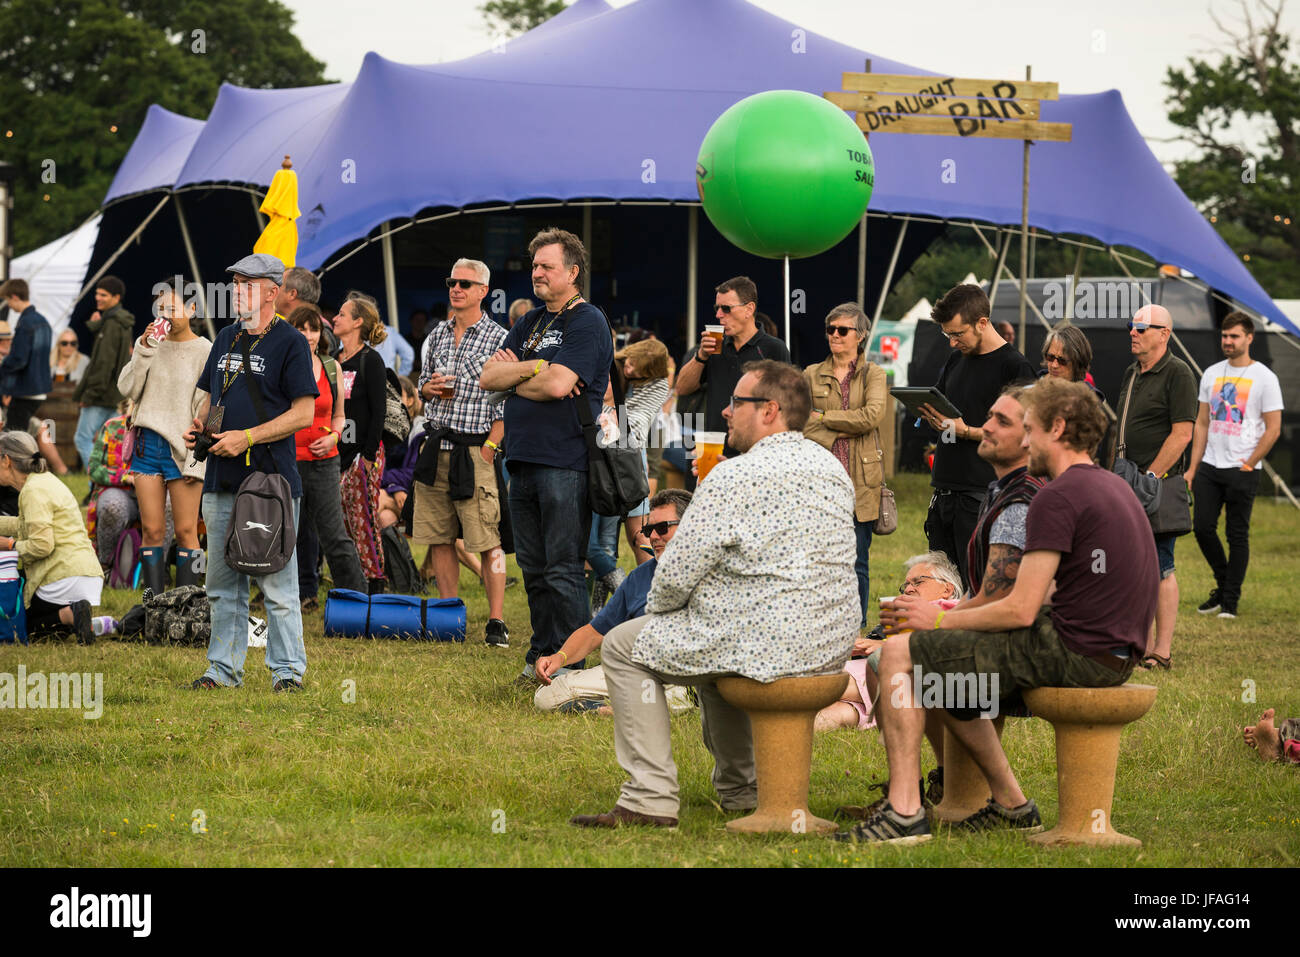 Glynde, East Sussex, 30th June 2017. Love Supreme Jazz Festival. People have arrived on site for the opening day of Love Supreme Jazz Festival at Glynde Place, in the idyllic setting of the South Downs. The festival, in its 5th consecutive year, is a sellout and set to be the biggest year yet. Weather is warm with a mix of intermittent sunshine, heavy cloud and rain showers. Stock Photo